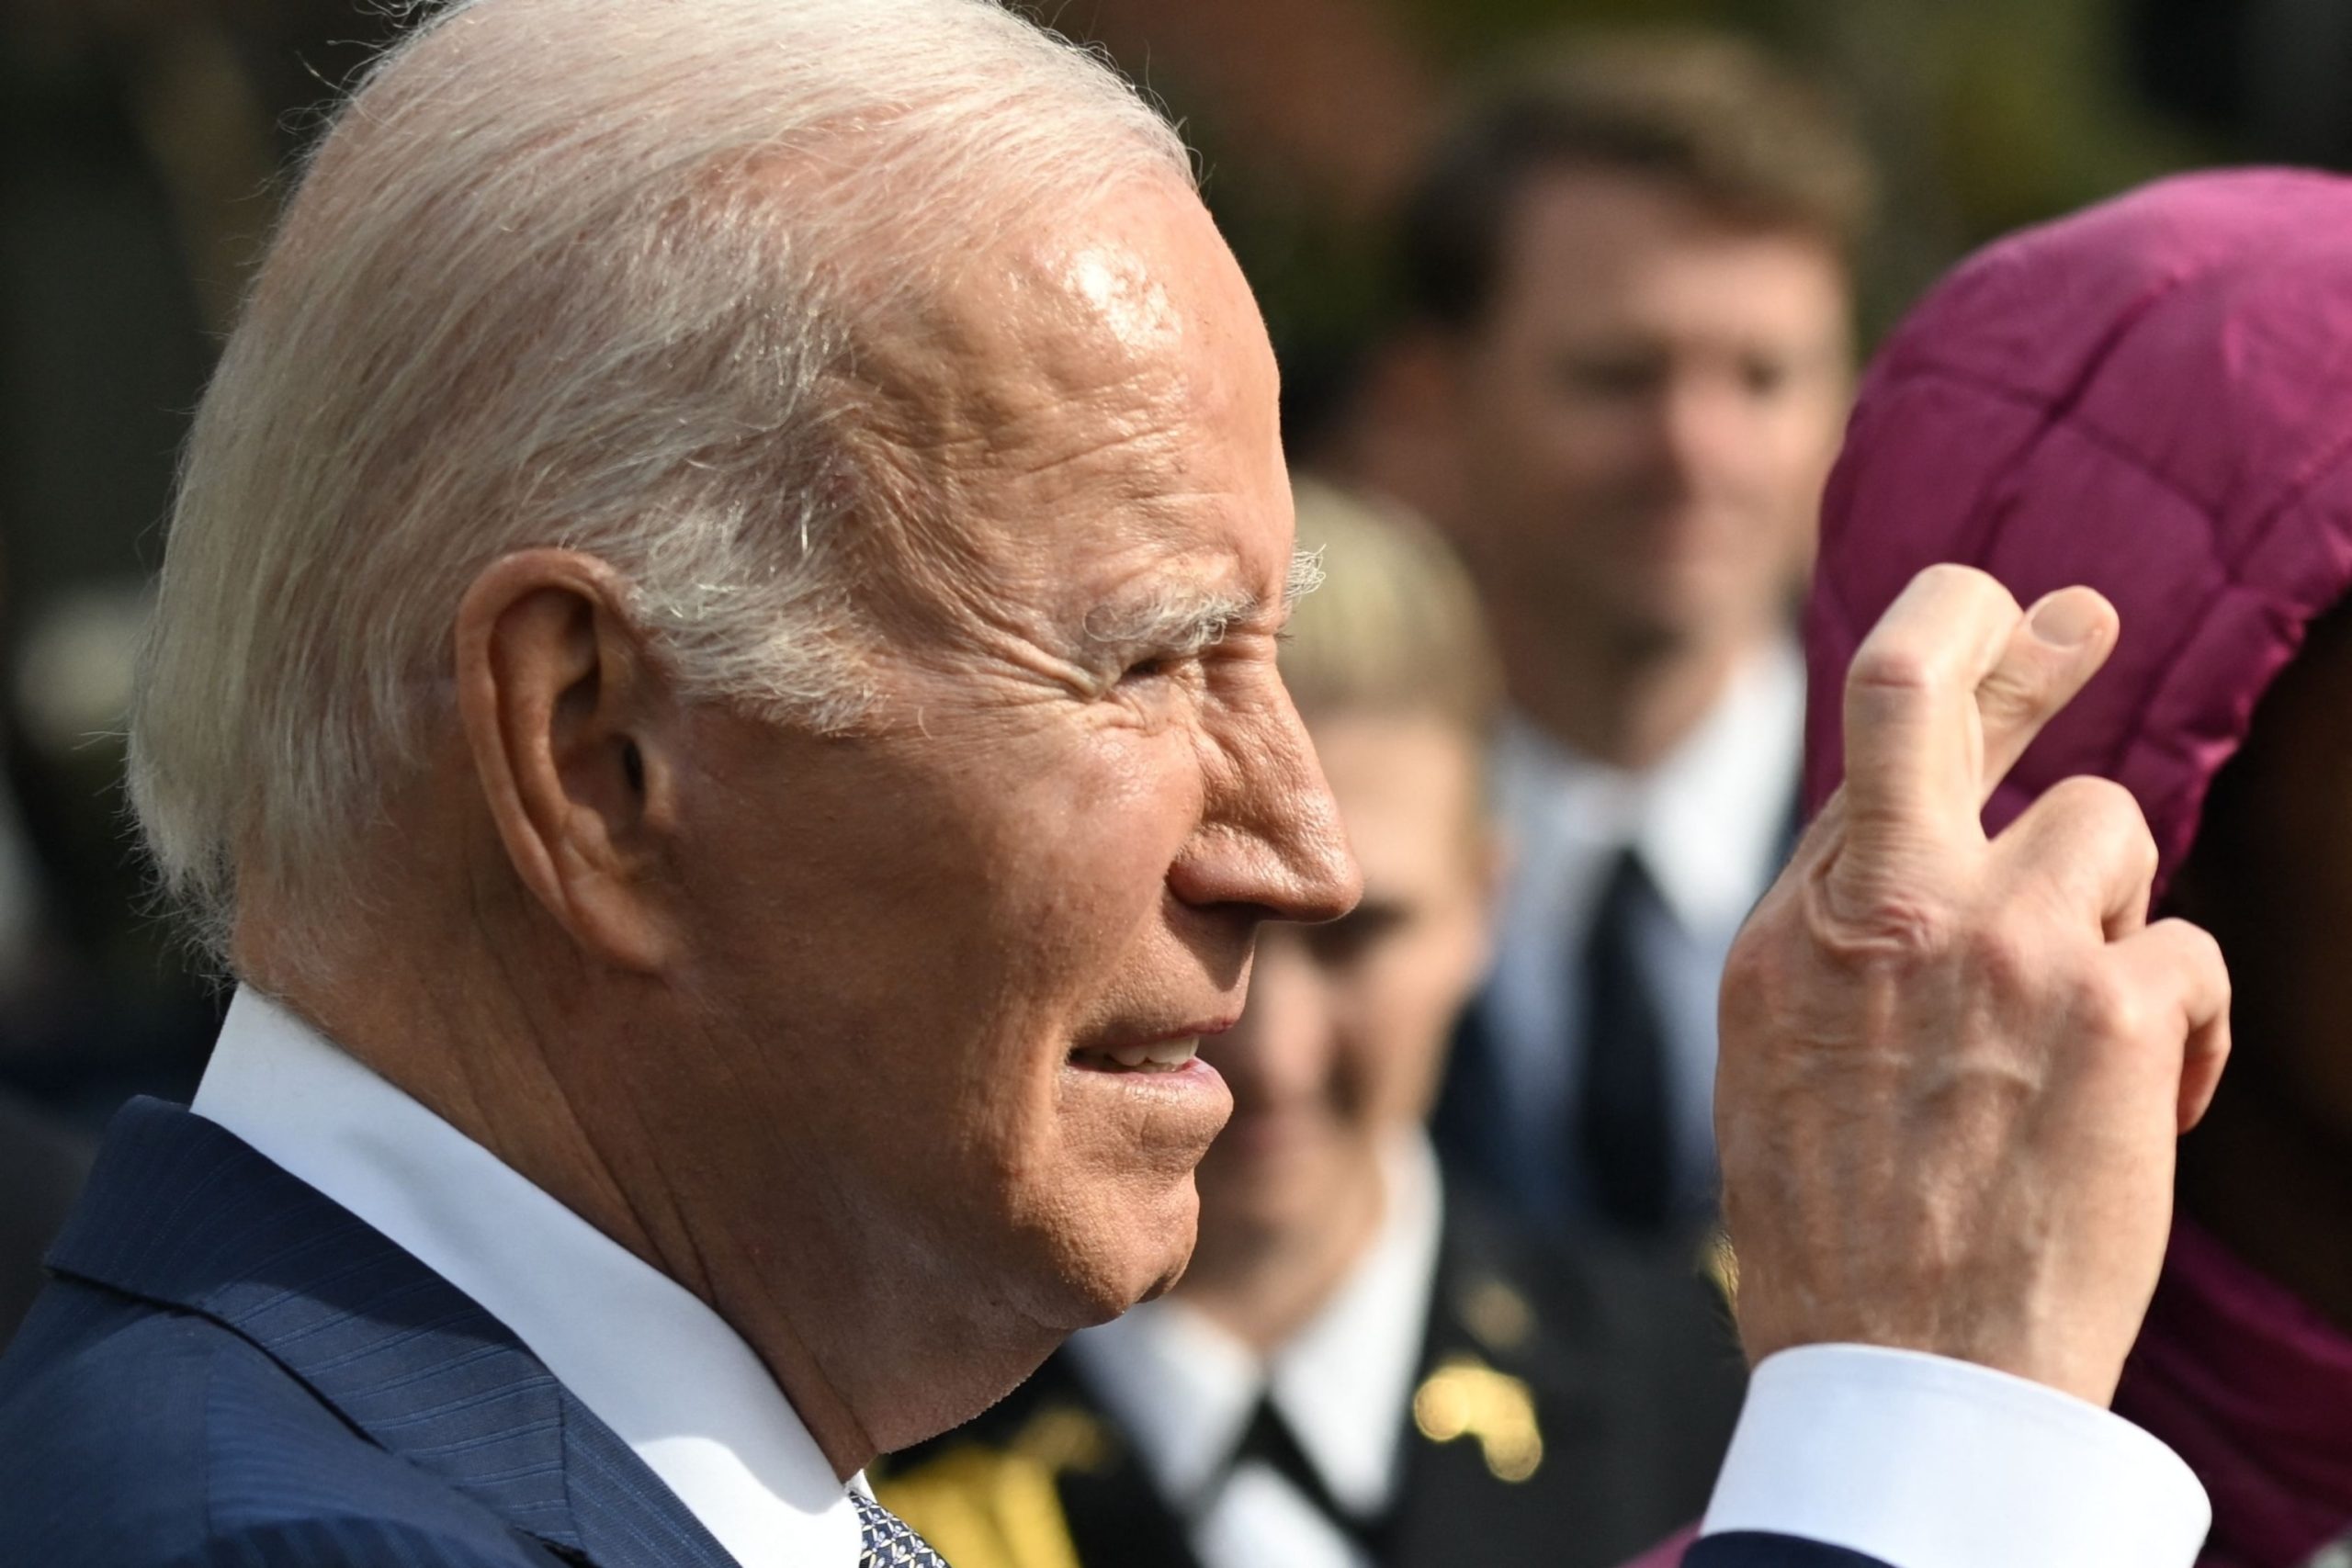 Biden Optimistic about Imminent Resolution to Secure Release of Hostages in Gaza